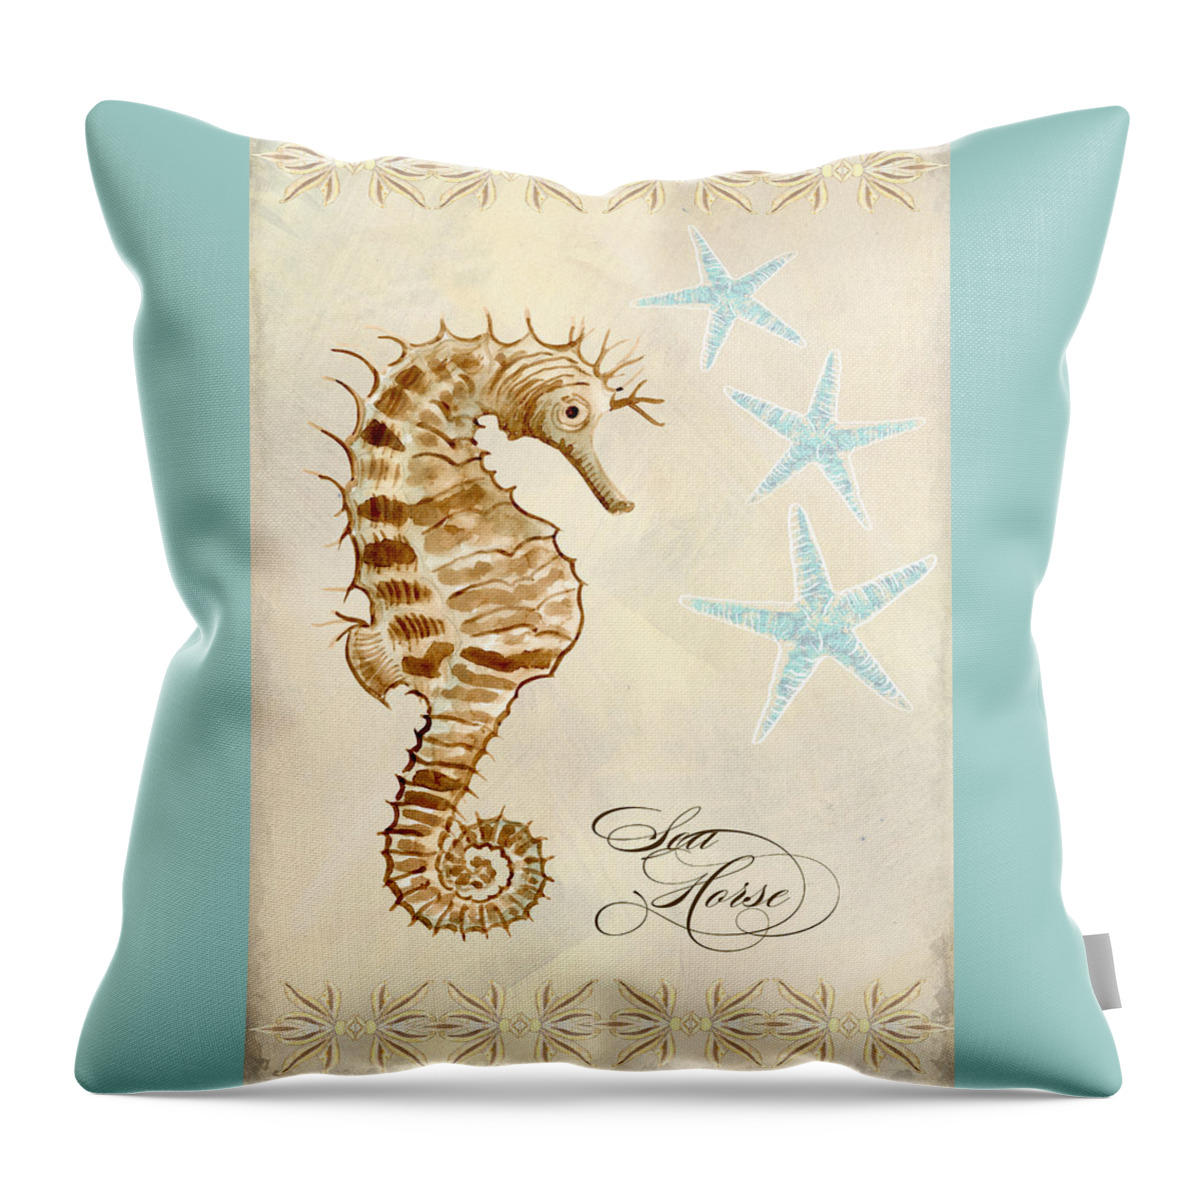 Watercolor Throw Pillow featuring the painting Coastal Waterways - Seahorse Dance by Audrey Jeanne Roberts